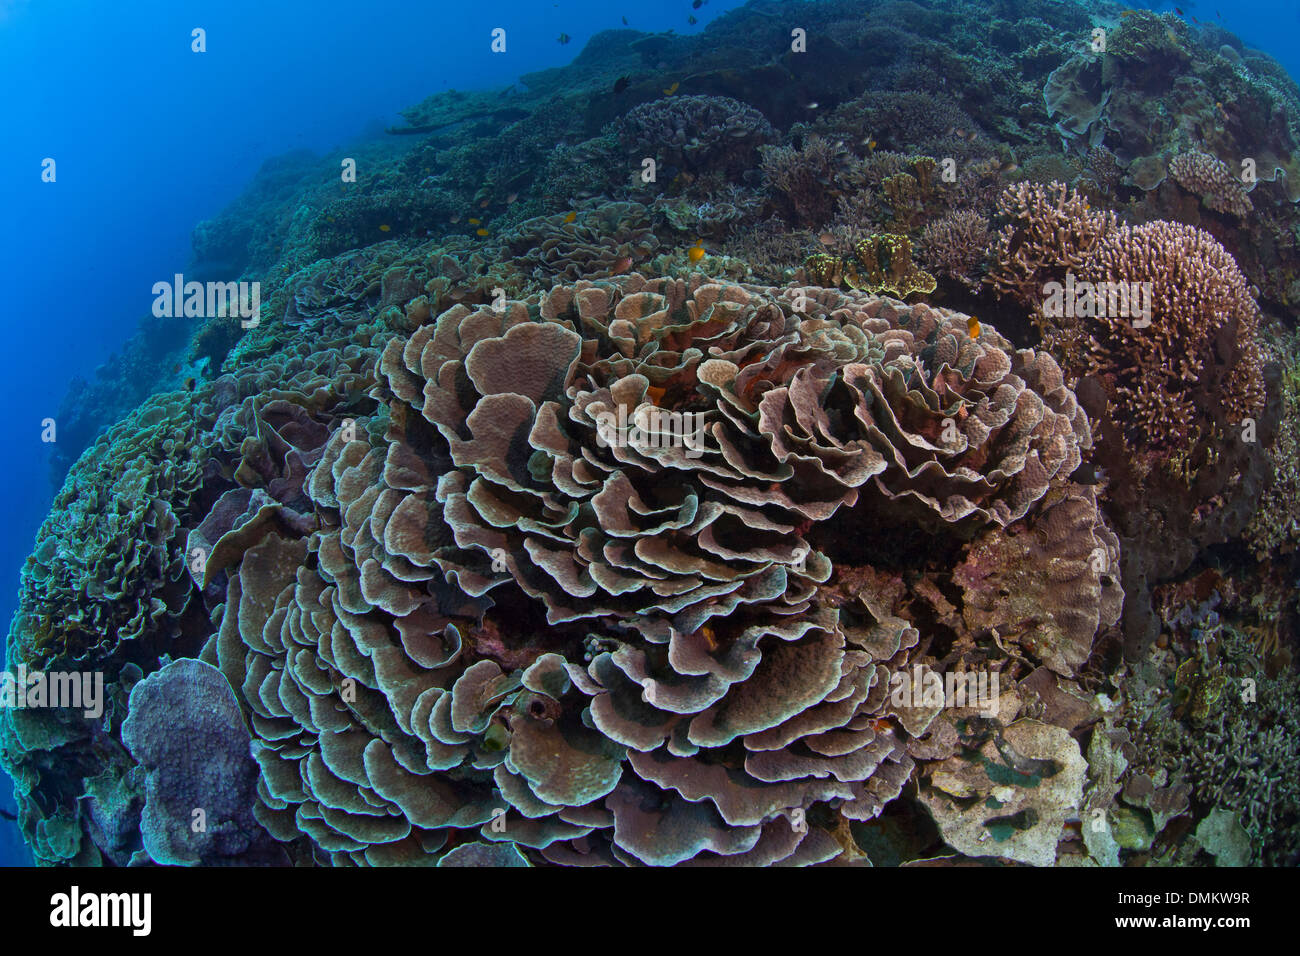 Coral reef seascape with colony of cabbage coral (Turbinaria sp.) in foreground. Bunaken Island, Indonesia. Stock Photo